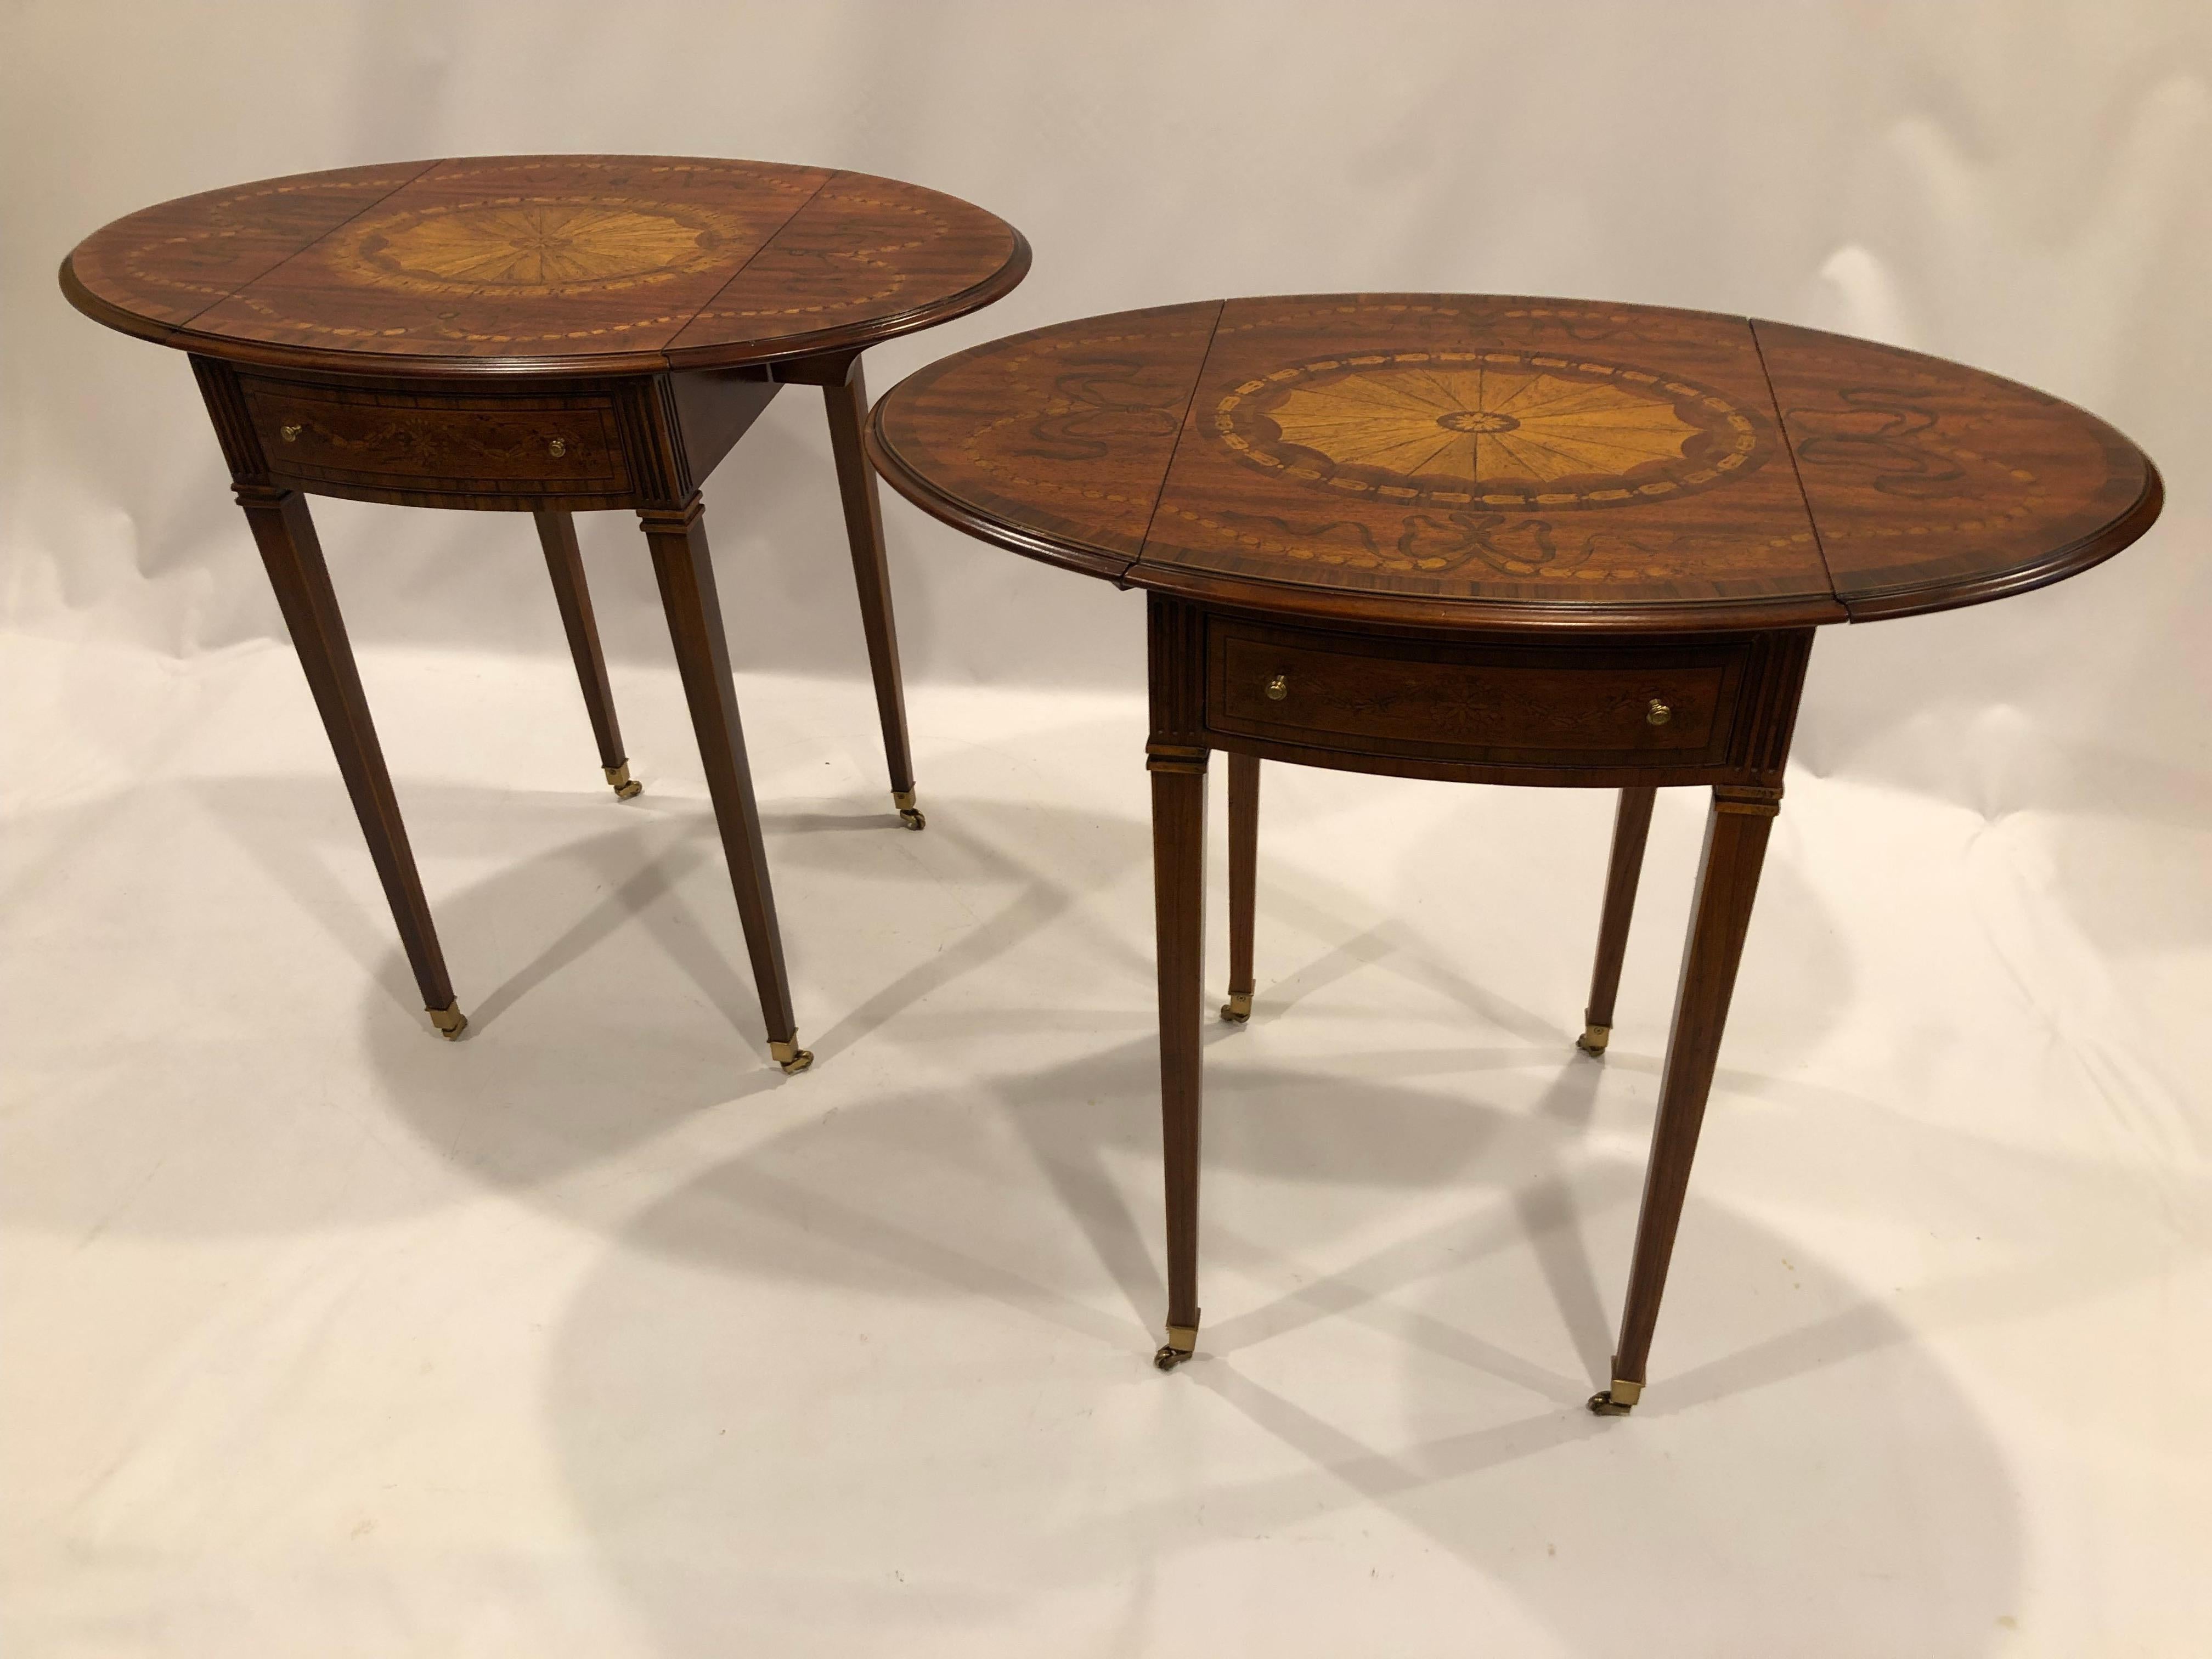 Magnificent pair of inlaid mixed wood drop leaf end tables that measure 15.25 w and are rectangular with the leaves down; 30.5 w and oval when open. There is one working drawer in each, and a faux drawer en verso. The central medallions vary